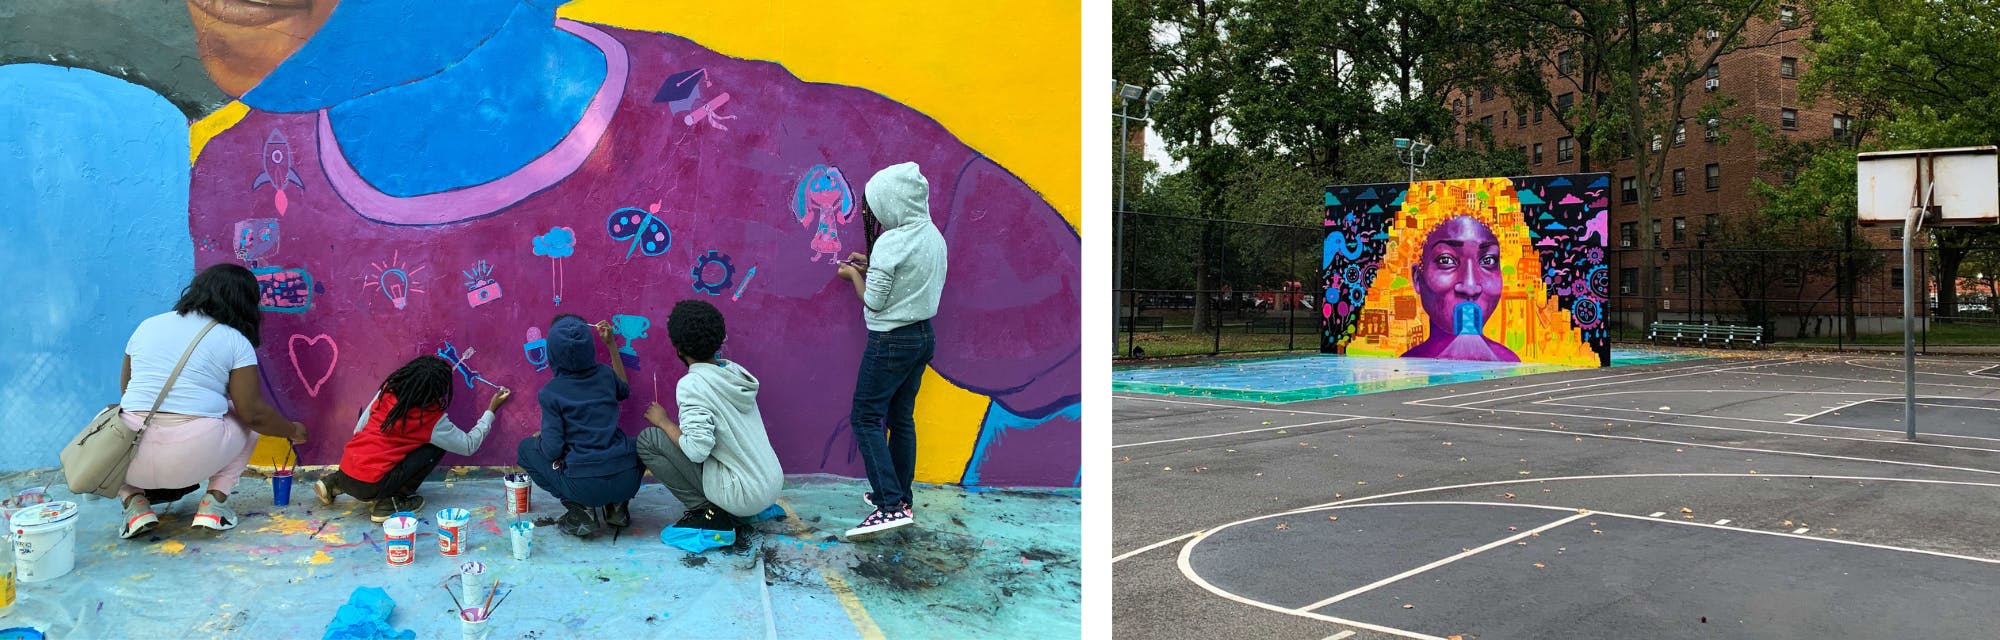 Left: Young residents painting a mural designed by the community and Joel Artista, 2020. Right: The completed mural.